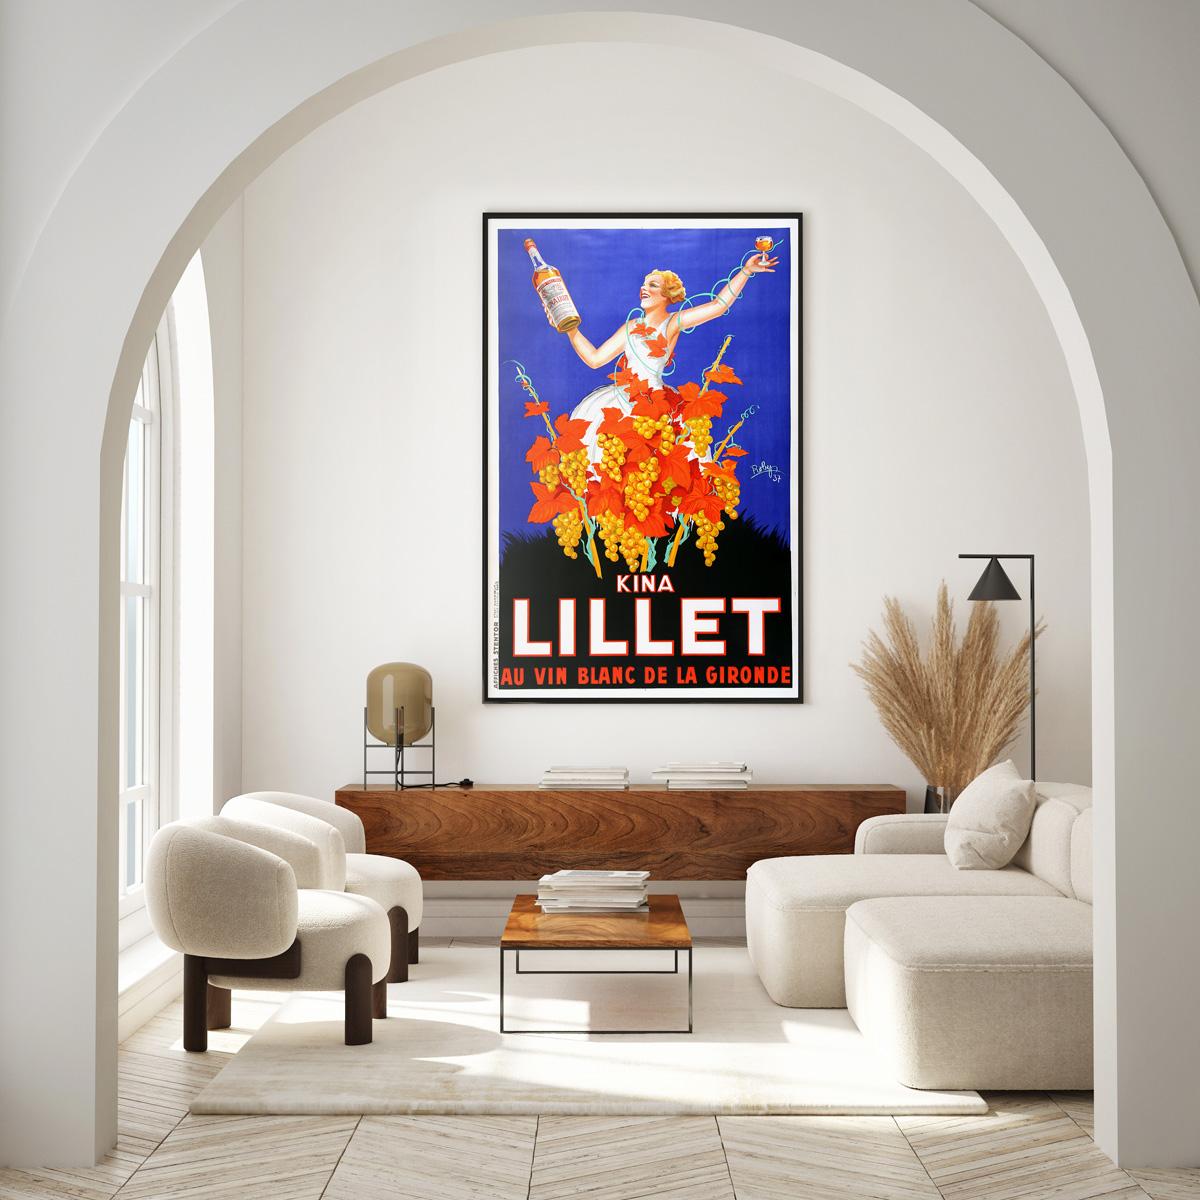 We adore this fabulous original Kina Lillet vintage French poster from 1937.

Kina Lillet an aperitif wine created in France in 1872, reformulated in 1986 and rebranded as Lillet Blanc to keep up with the current trends of the day by making the